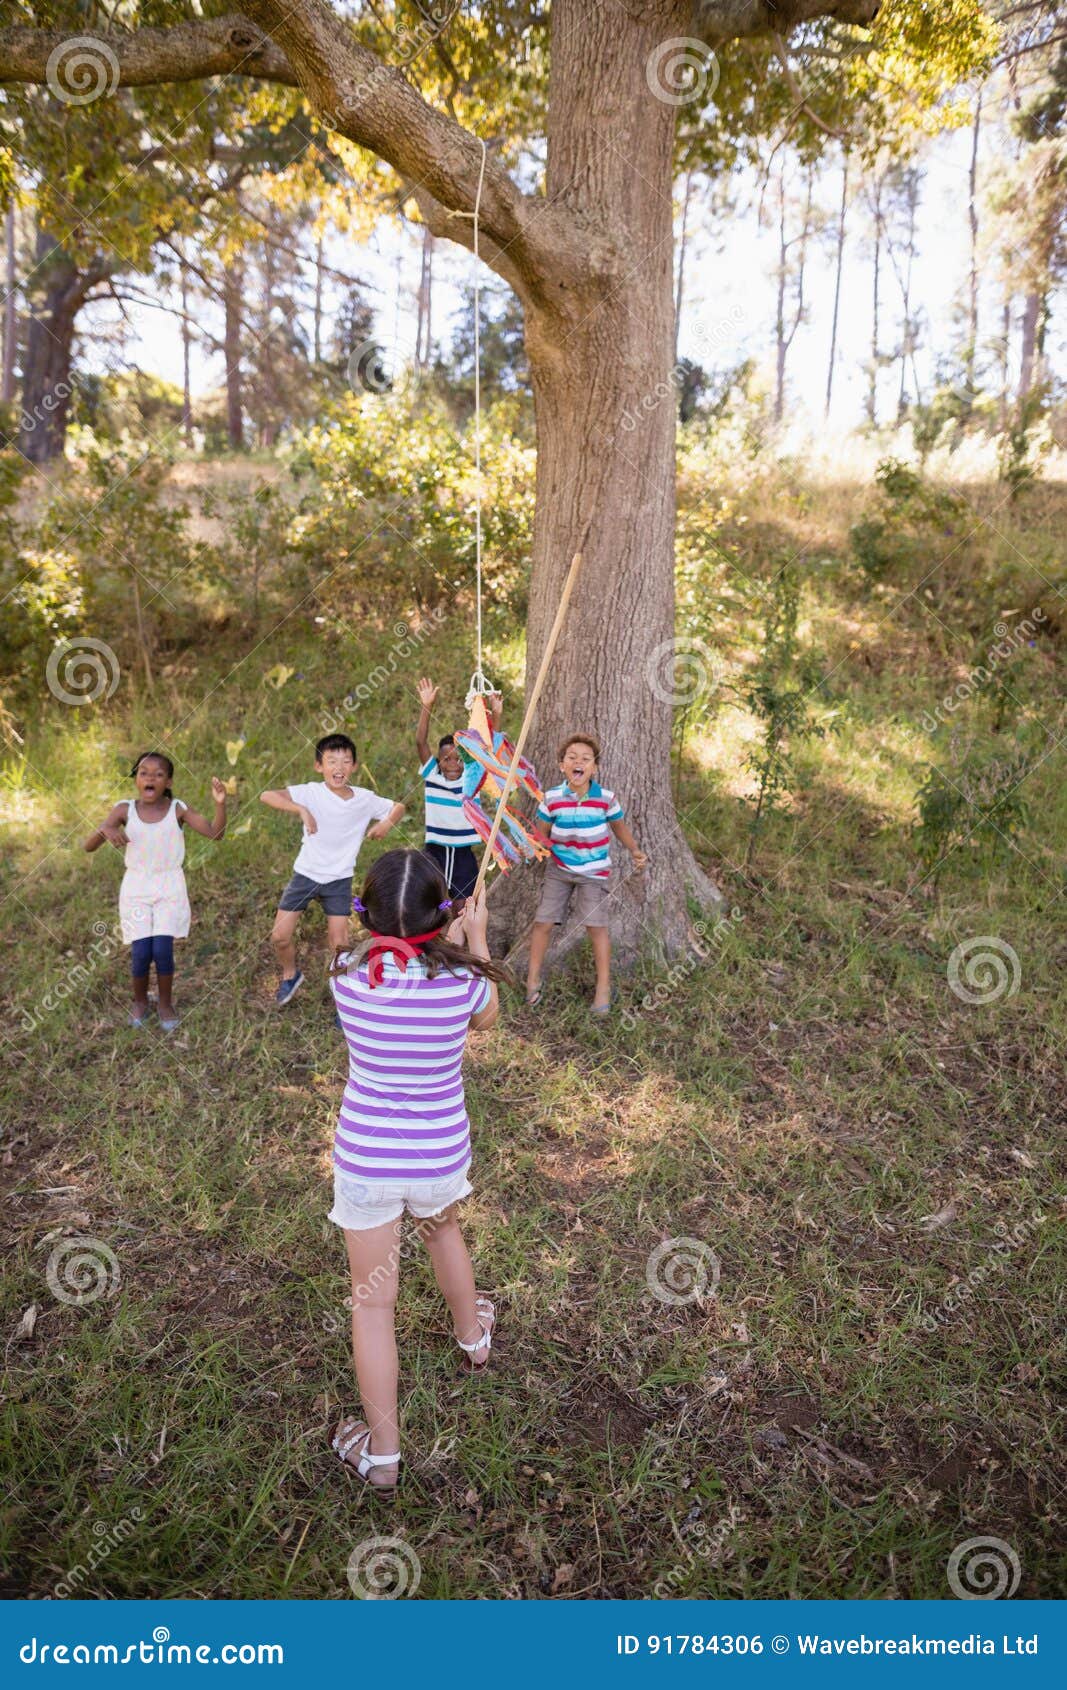 Blindfolded Girl Hitting Pinata Hanging on Tree in Forest Stock Photo -  Image of girl, length: 91784306